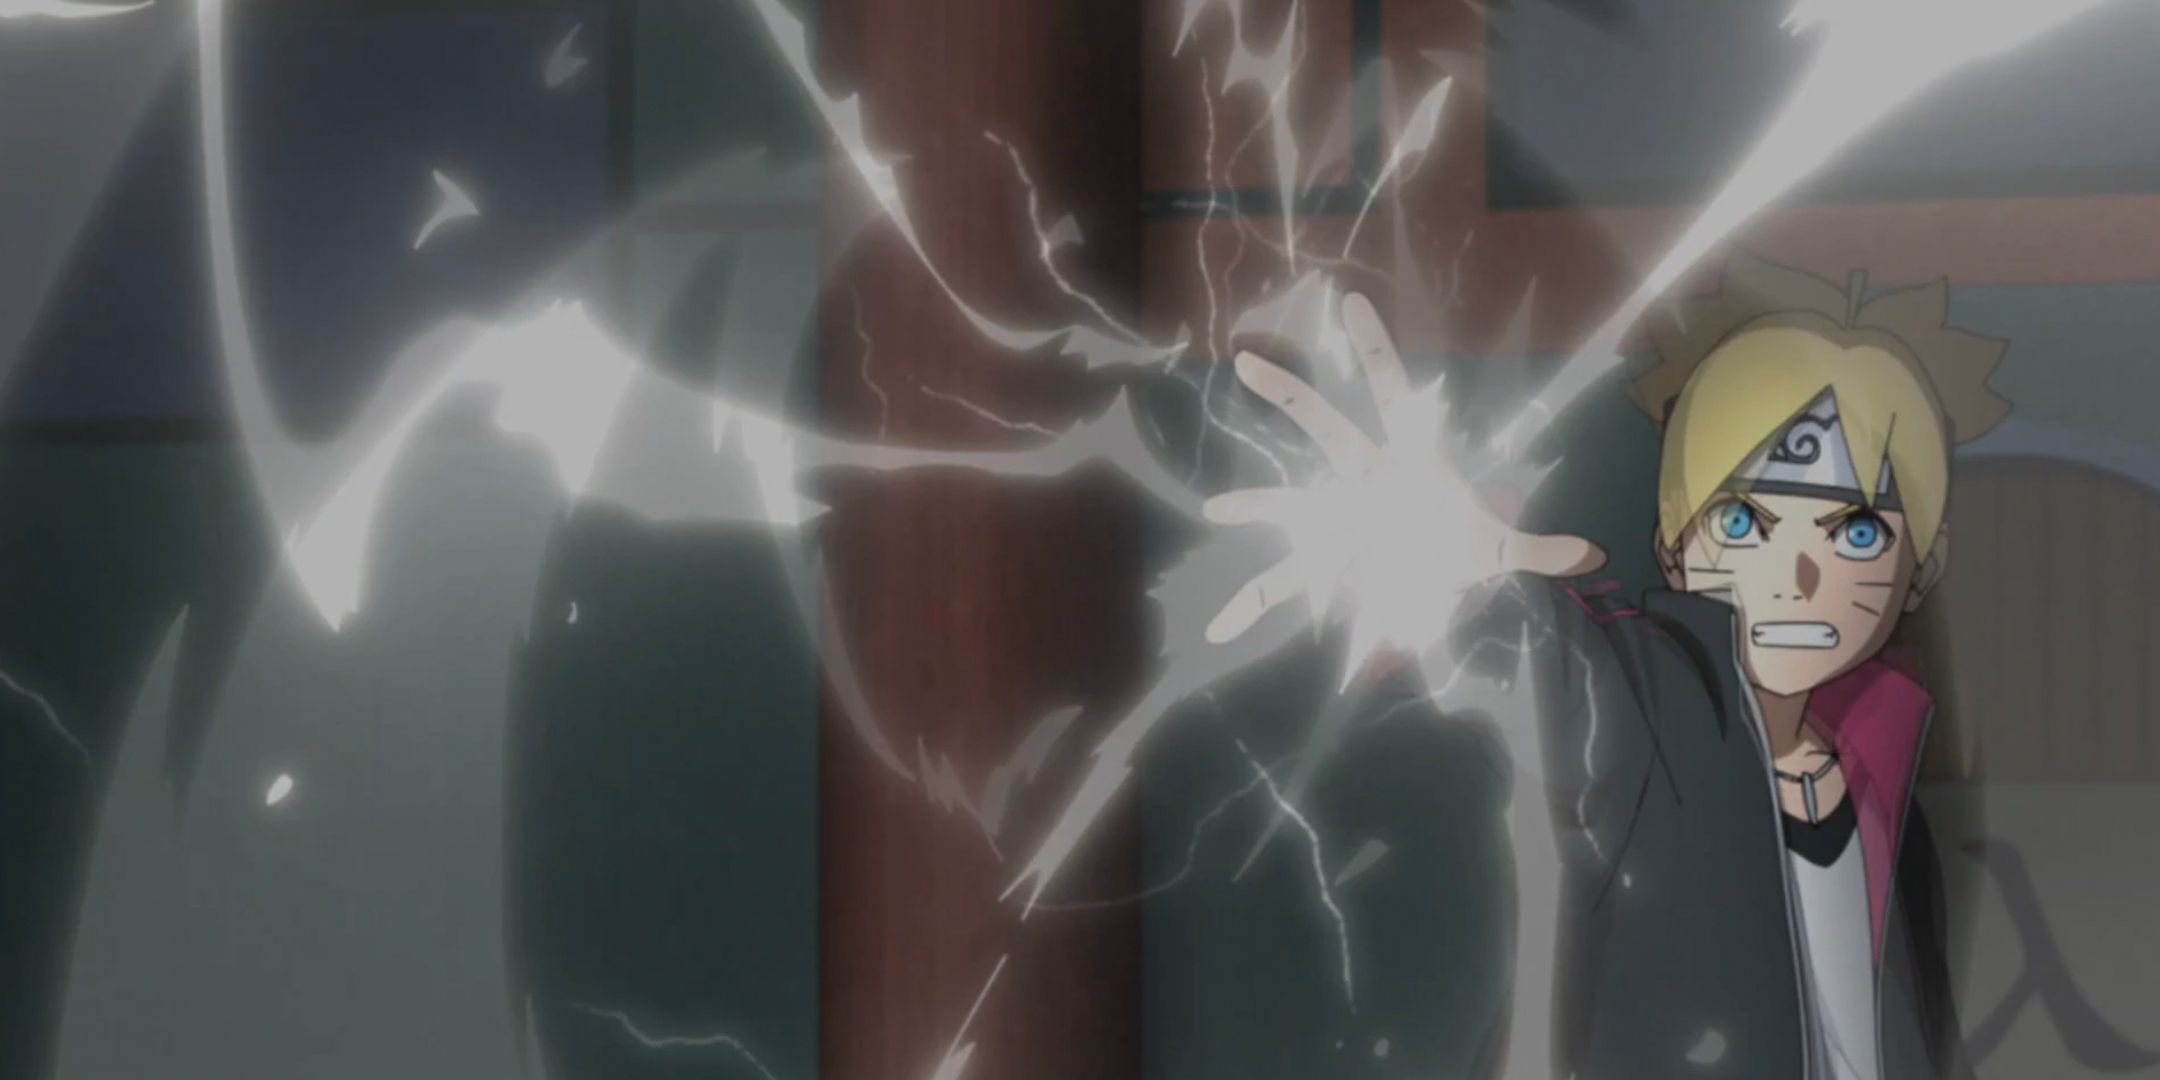 Boruto uses the Lightning Release Thunderclap Arrow jutsu in the anime to produce lightning from his palm